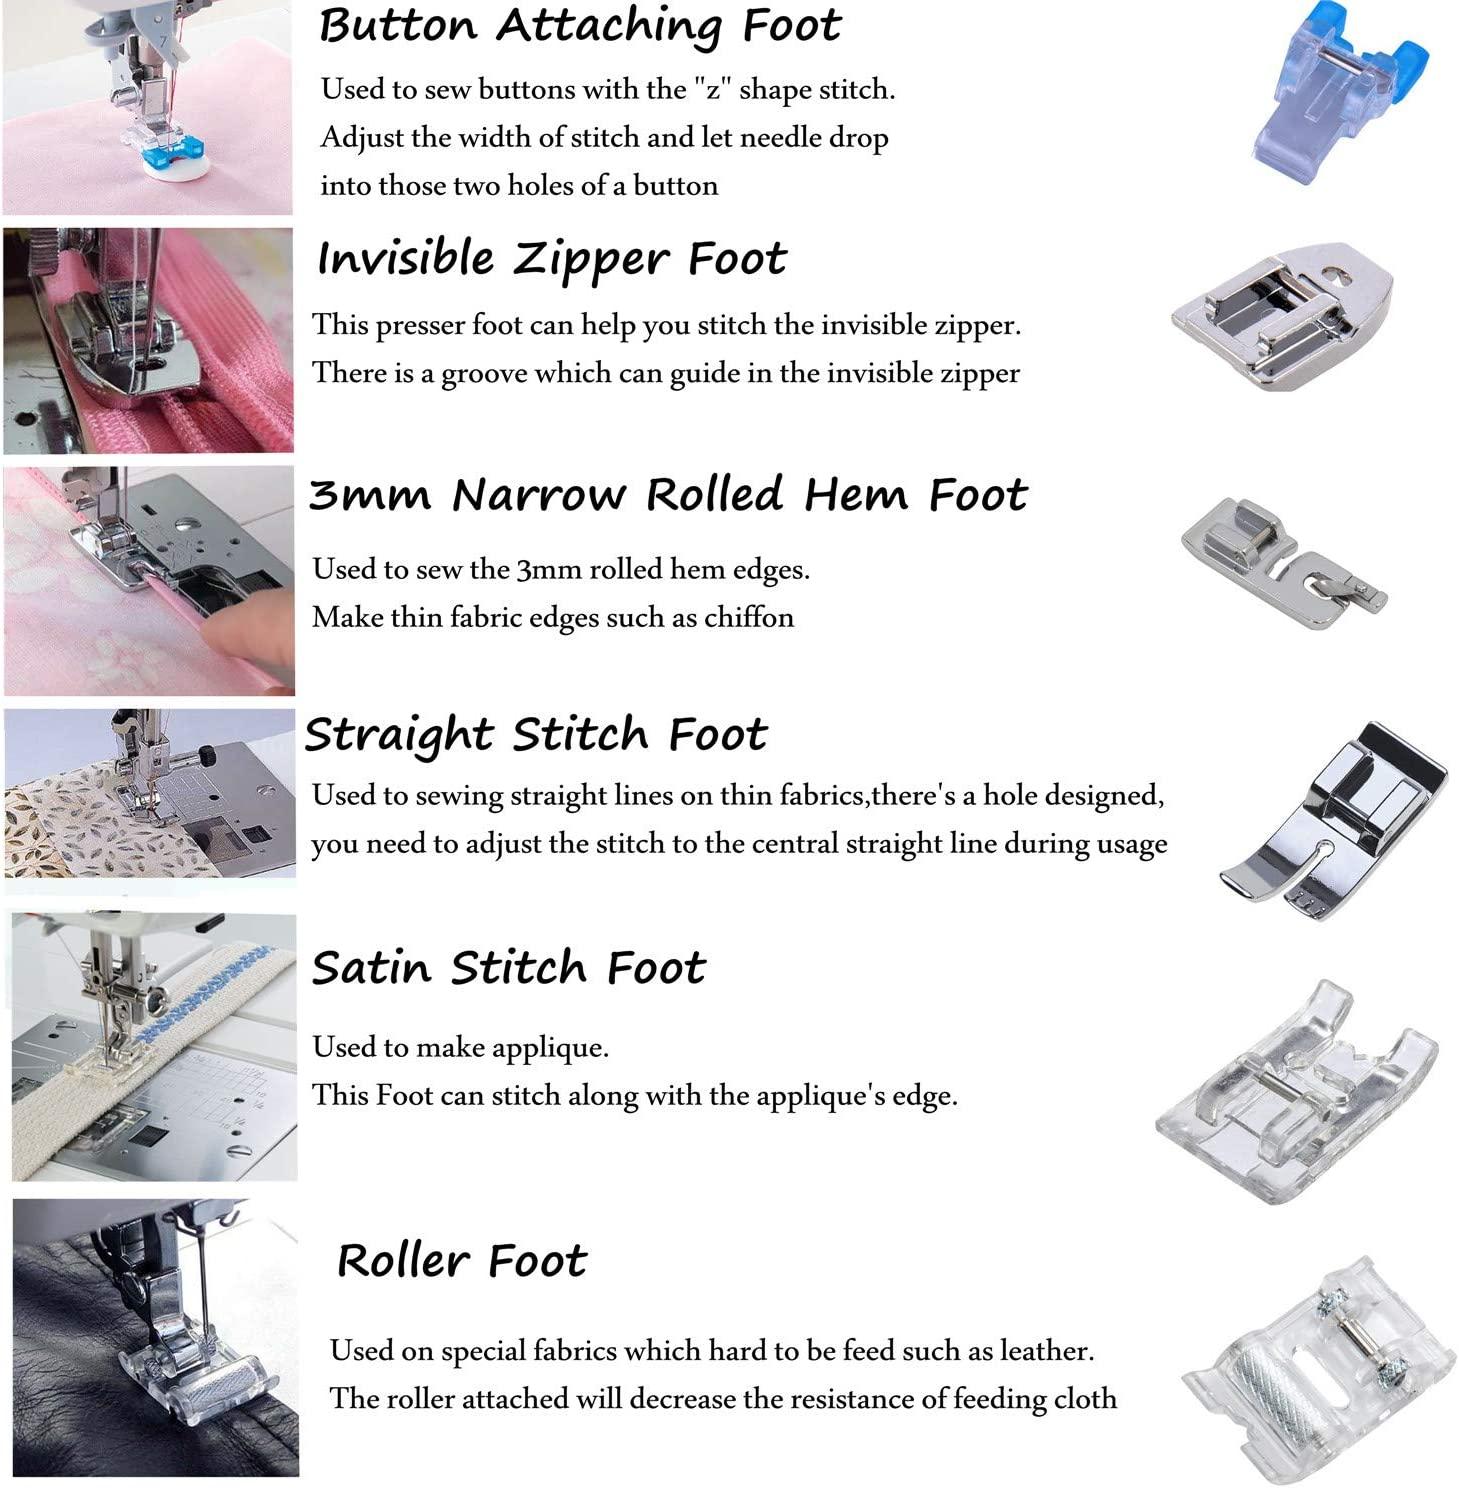 Janome Button Sewing Foot - Quick and easy button sewing